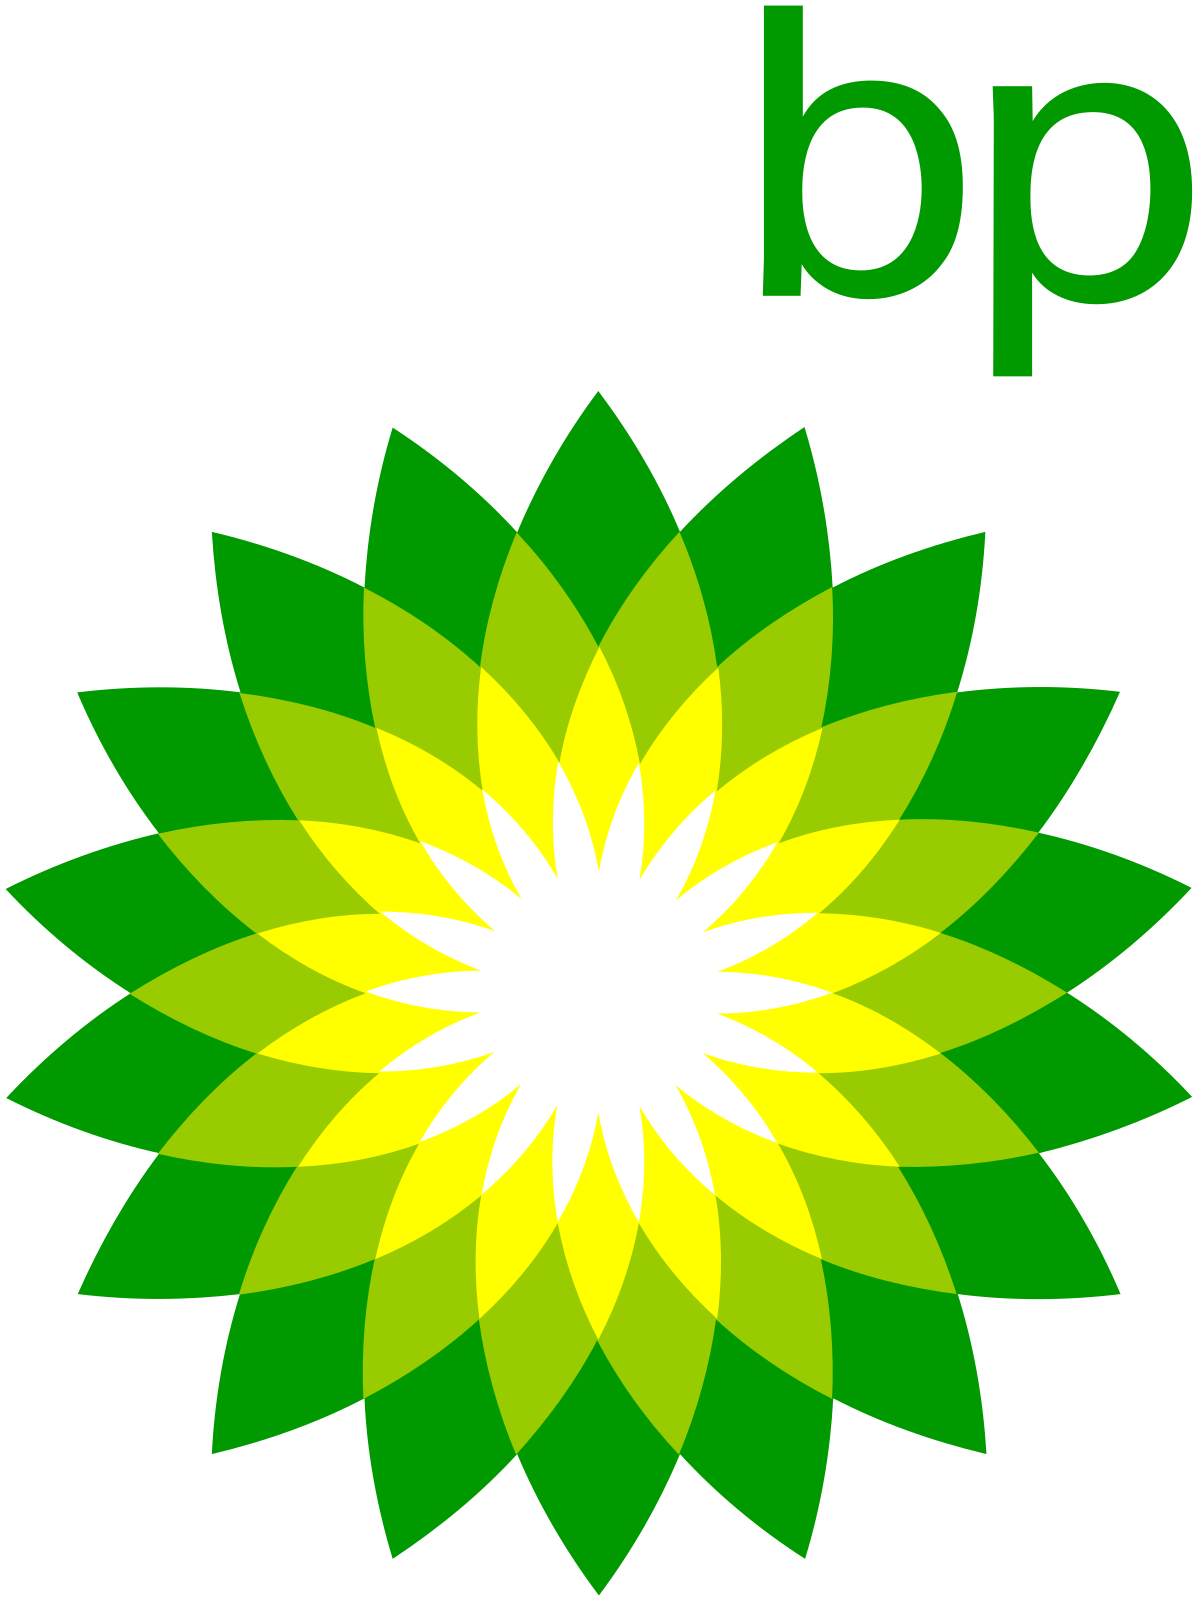 Oil and Gas Company Red Eagle Logo - BP